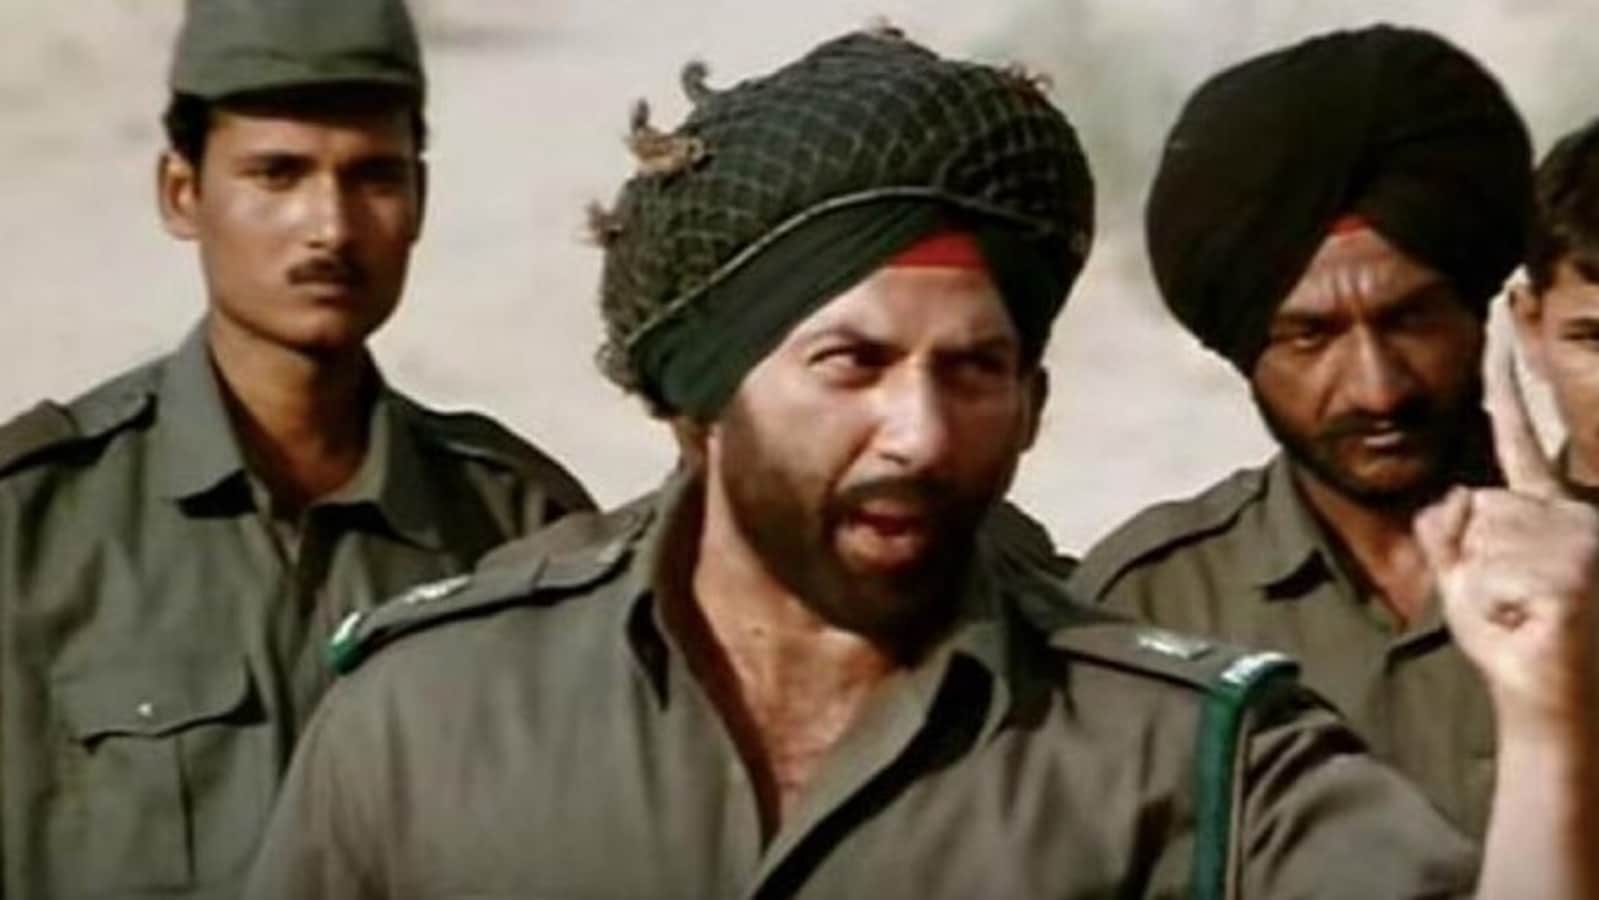 Sunny Deol’s act as a daring soldier is still as fresh in people’s minds as ever as the actor showed the zeal that pulls an army man in times of distress perfectly.